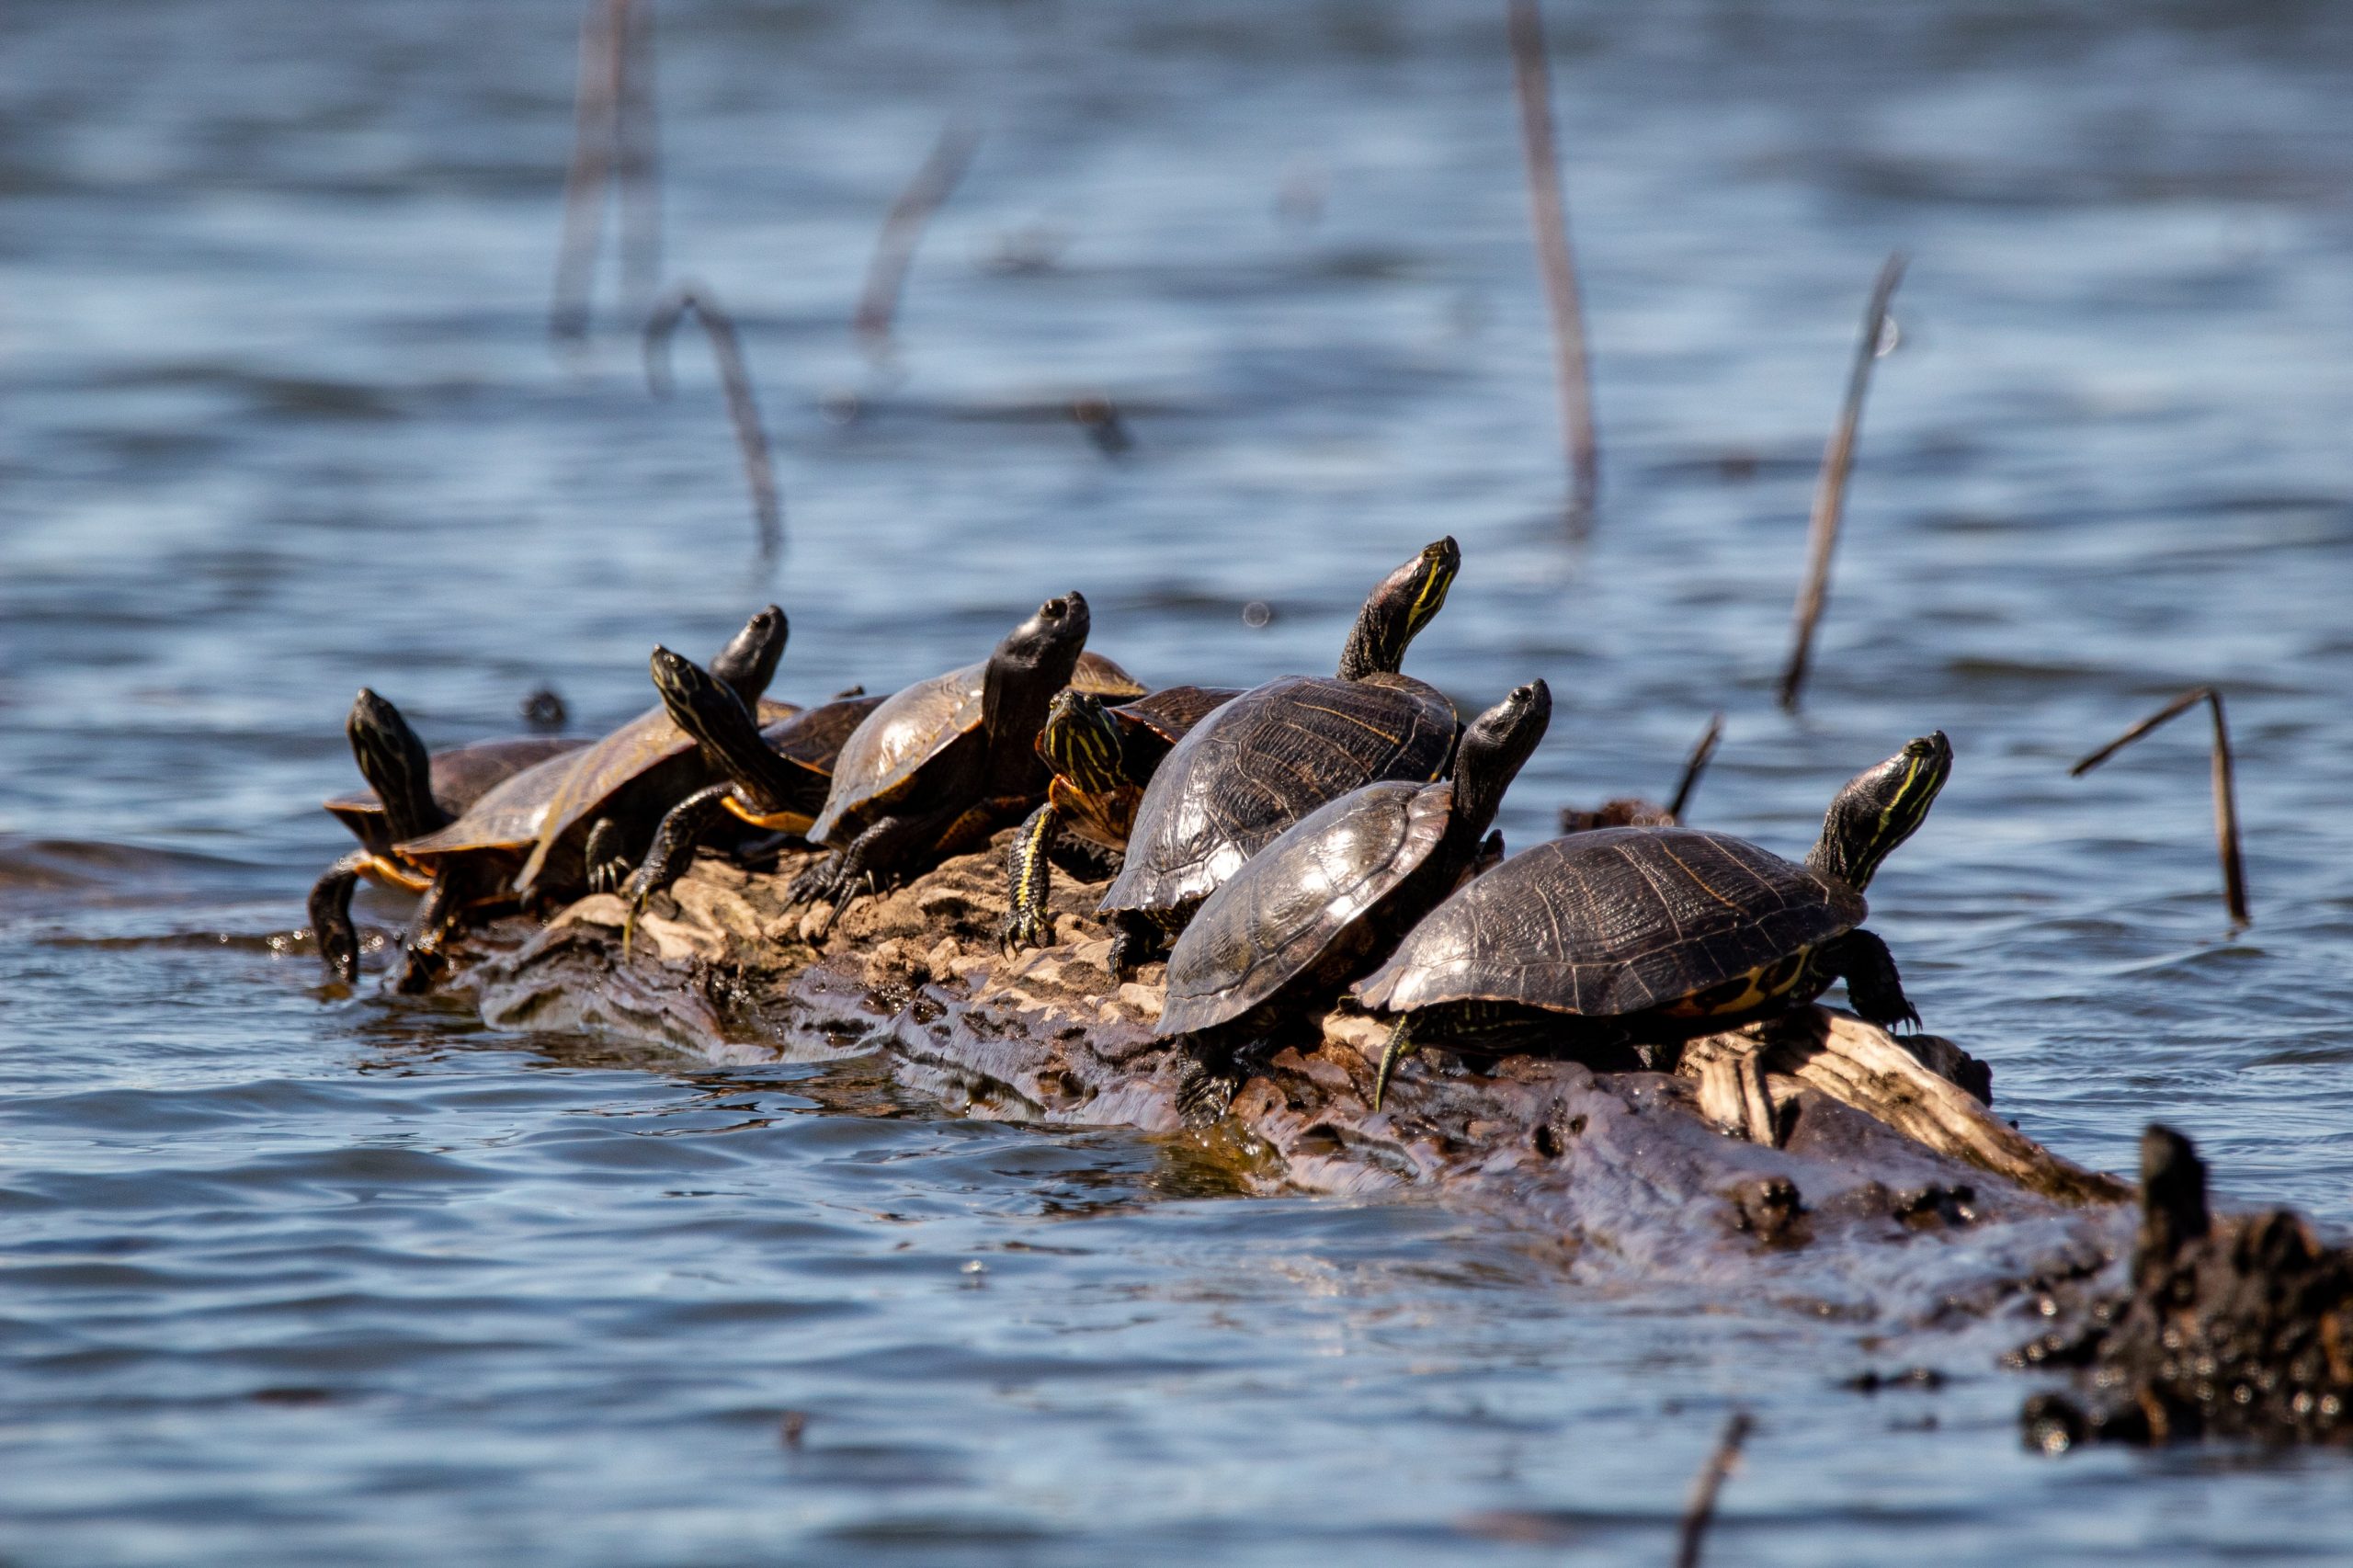 A photograph of nine turtles sitting in line on a narrow rock and looking in different directions. The rock is partly submerged in a dark blue lake.